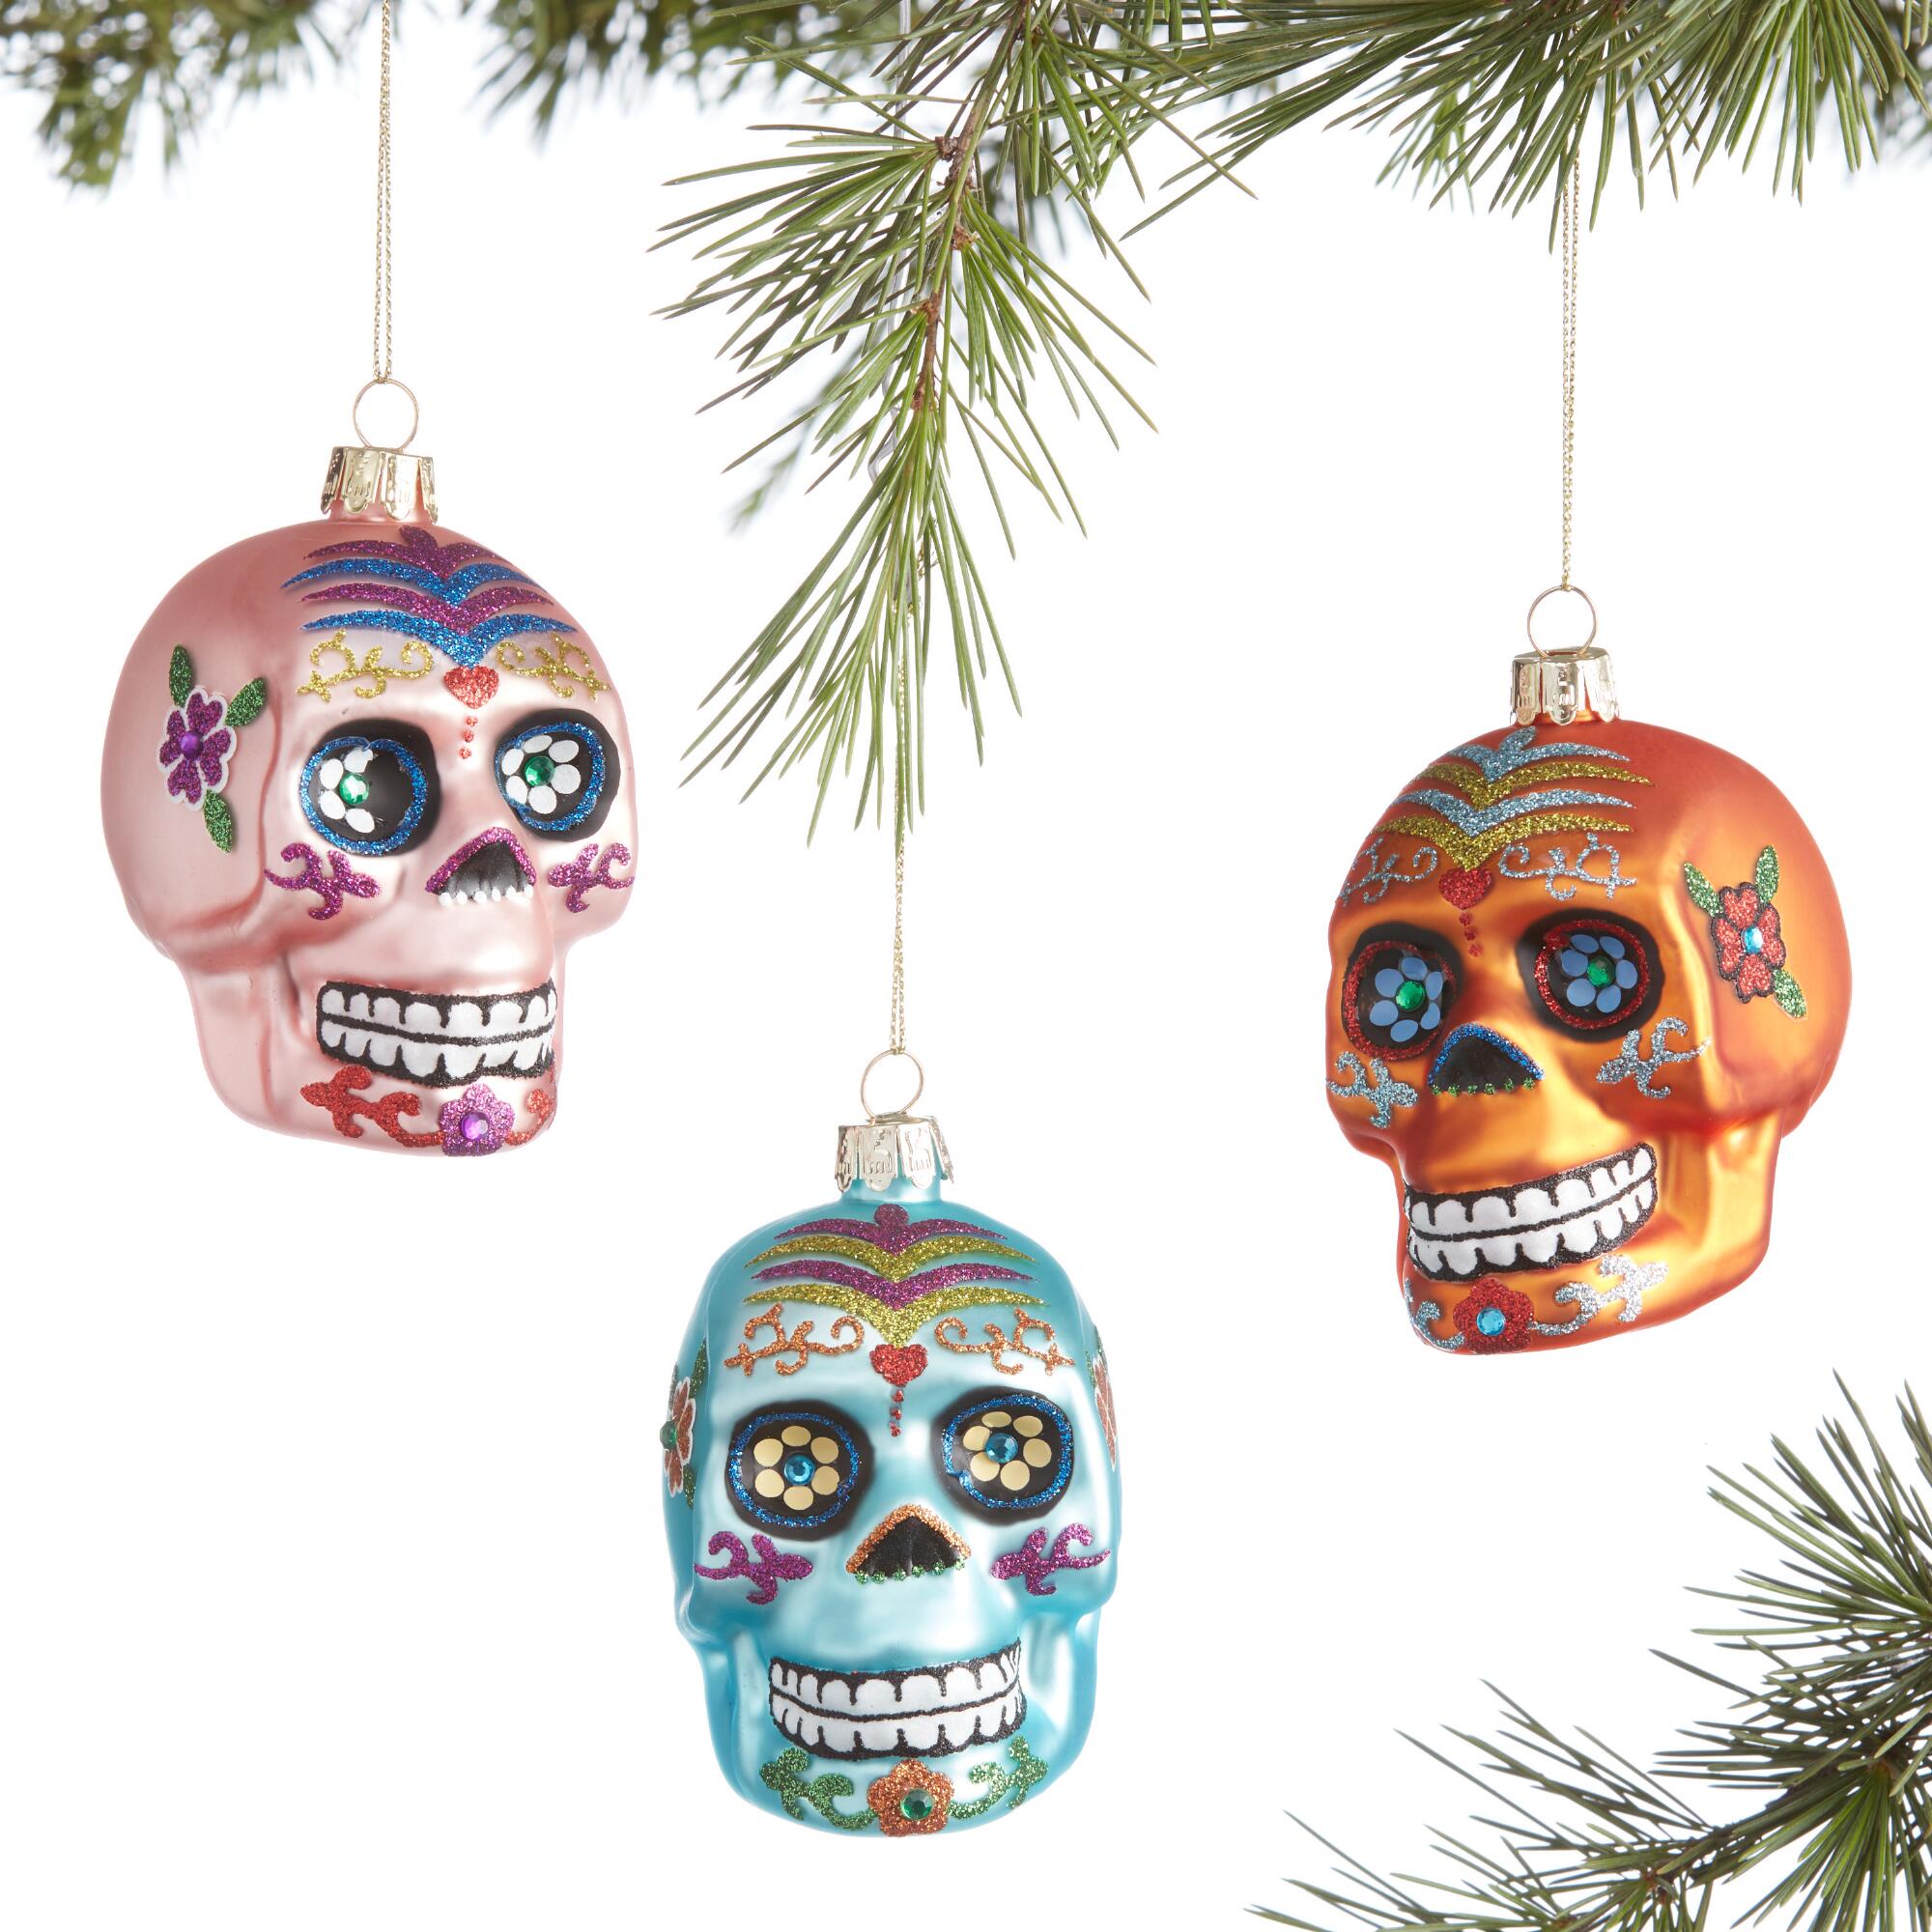 Glass Day of the Dead Skull Ornaments Set of 3 by World Market